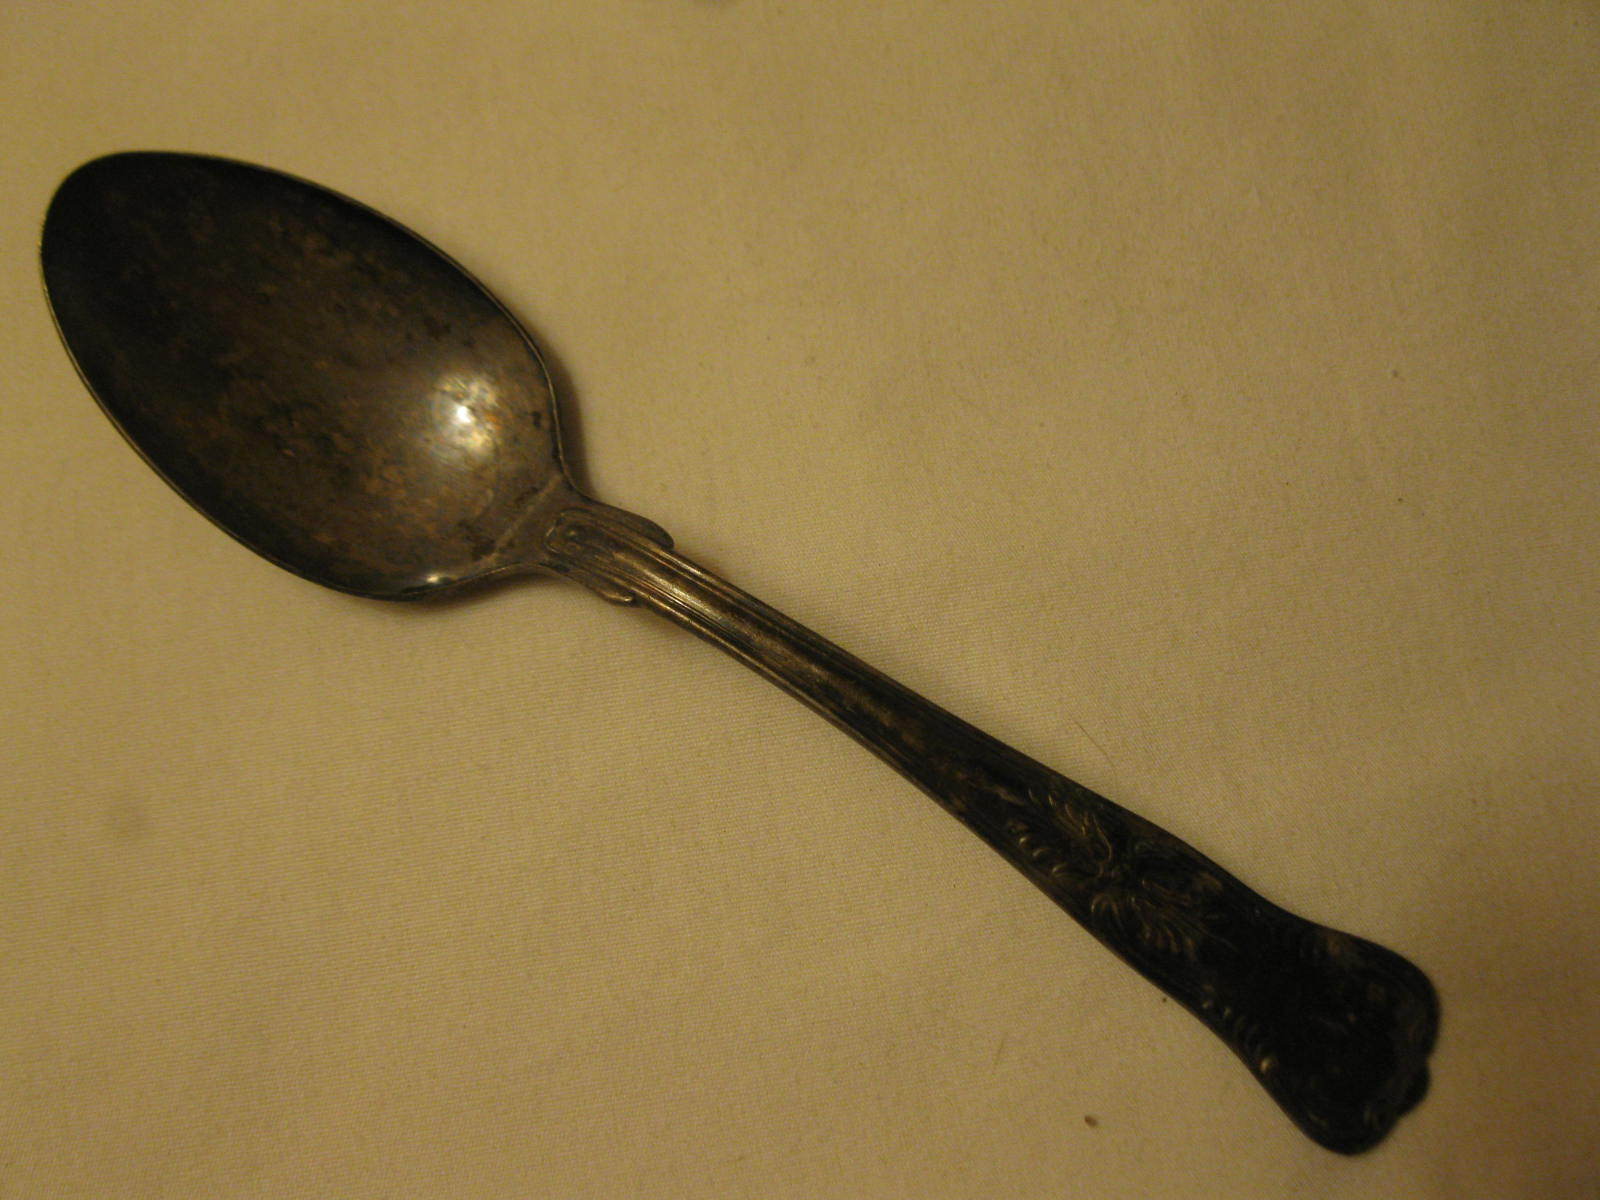 Reed & Barton 1900 King's Pattern 6" Silver Plated Tea Spoon - $10.00